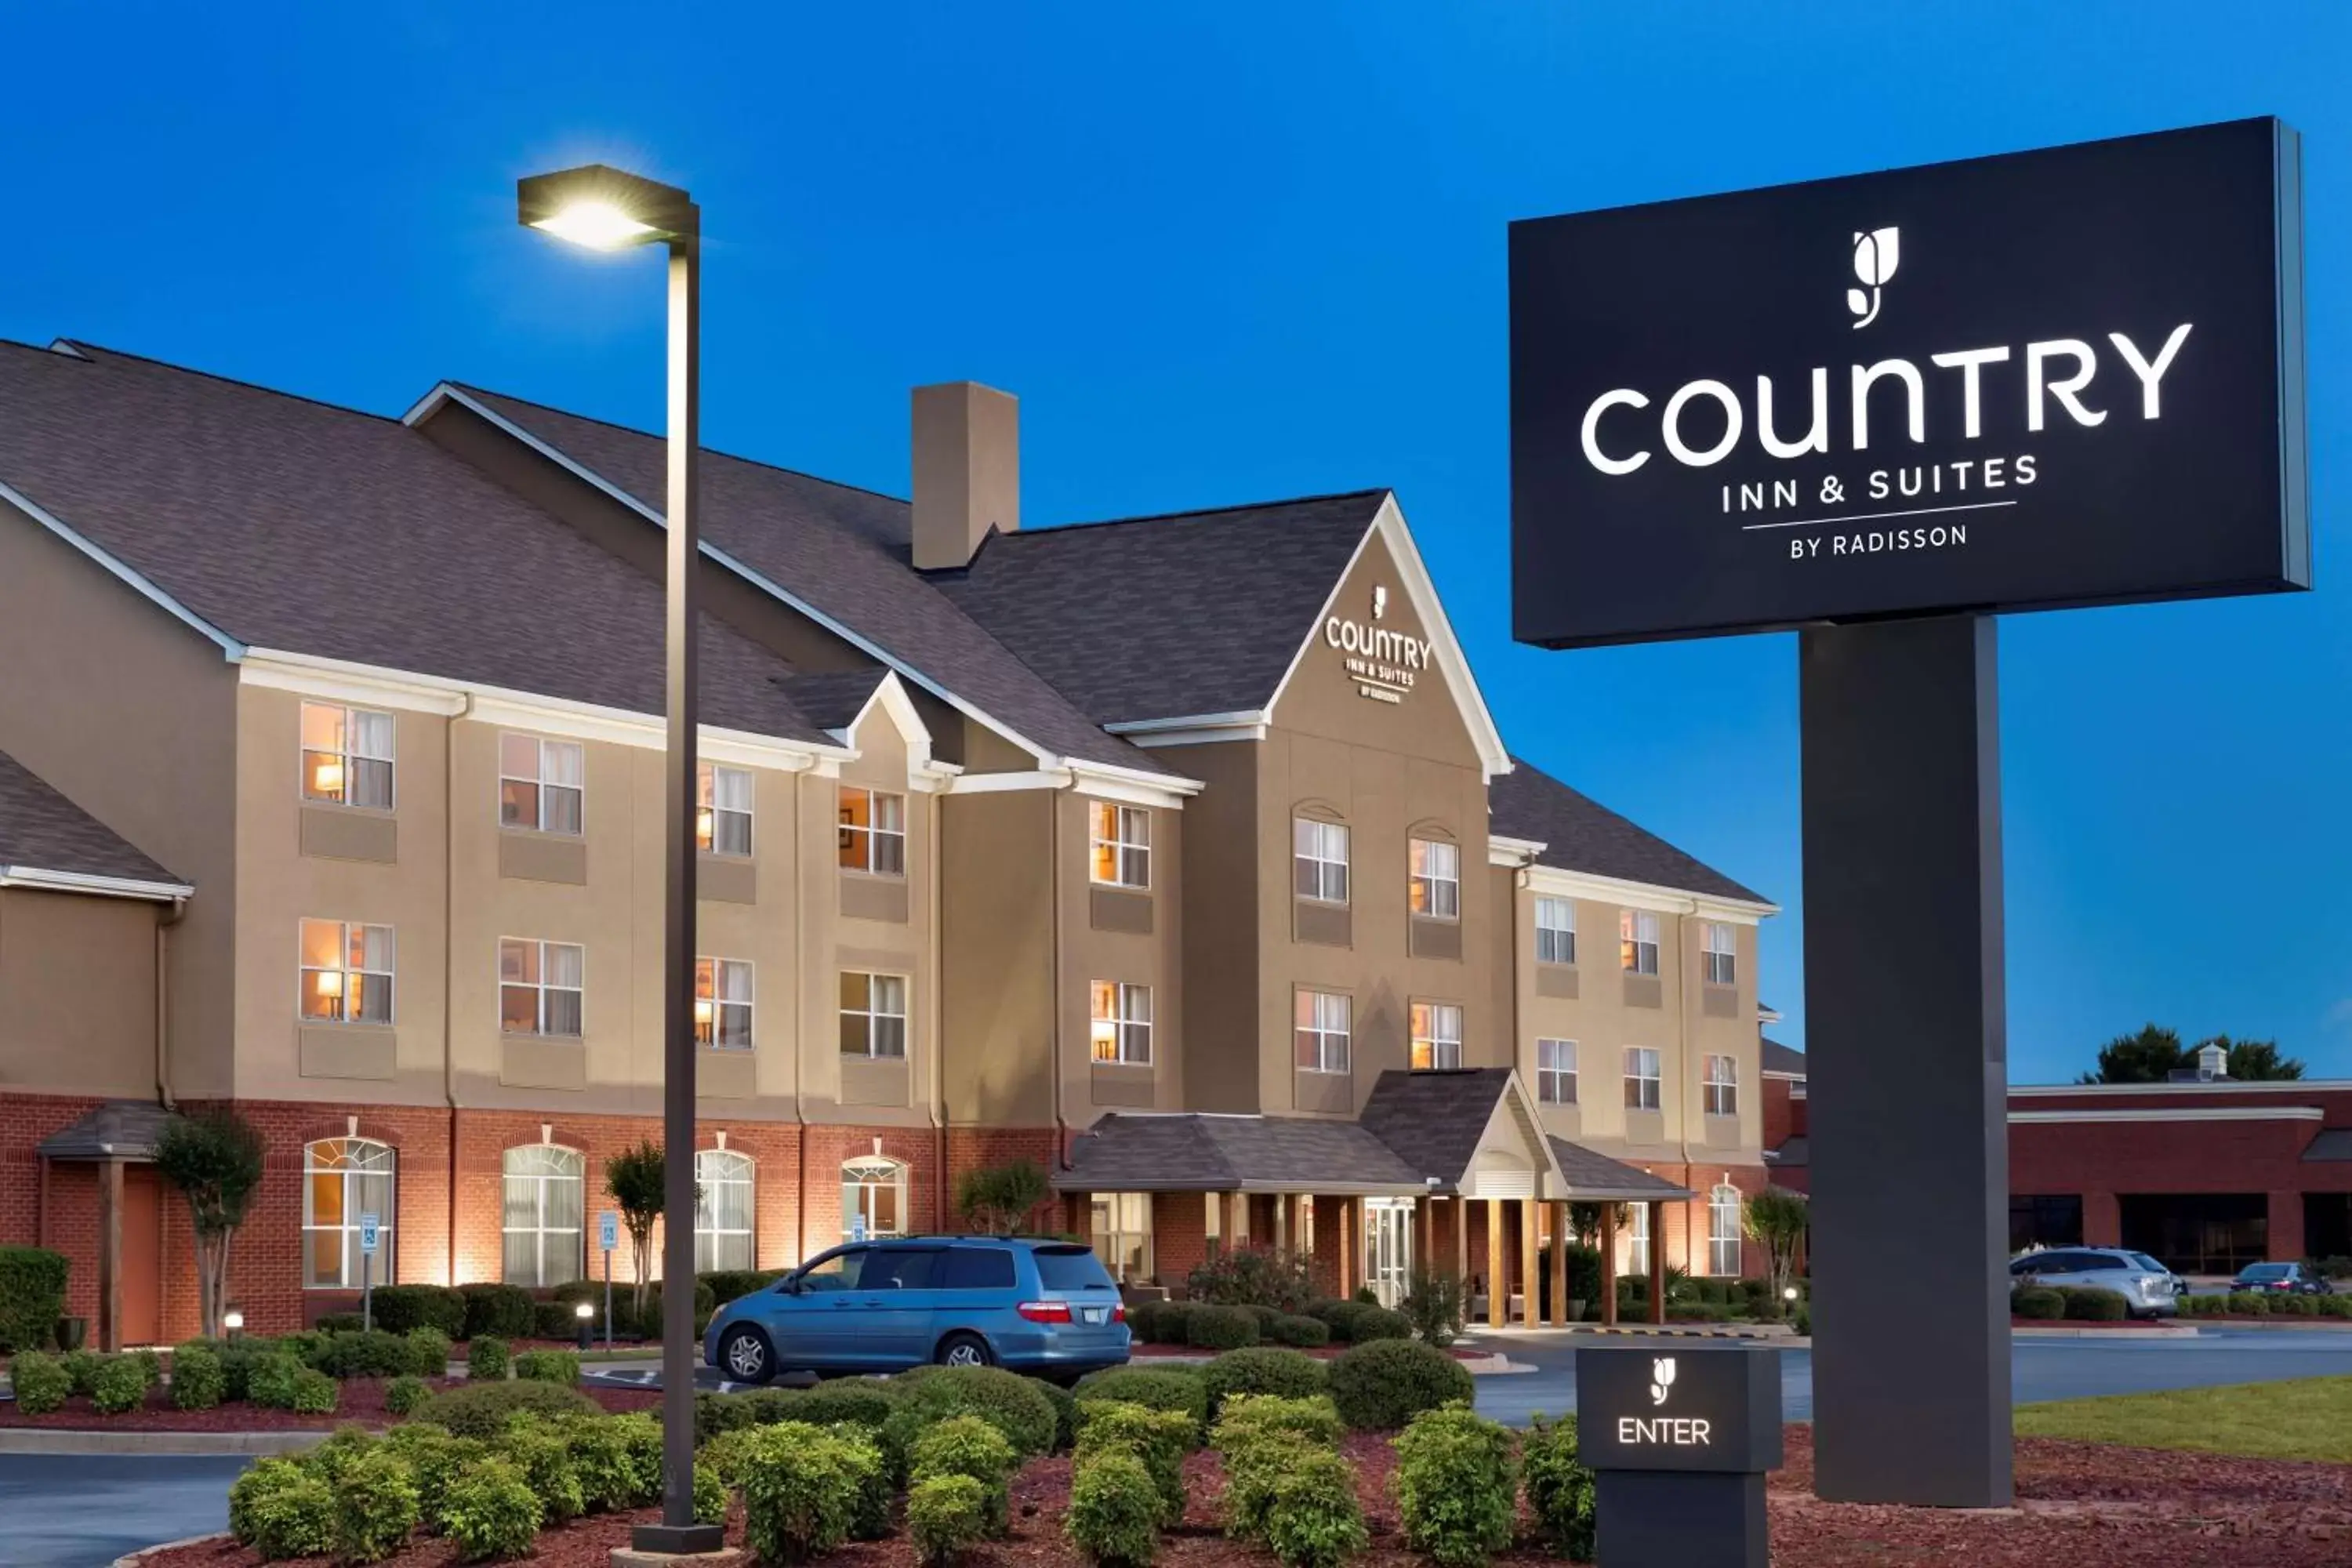 Property building in Country Inn & Suites by Radisson, Warner Robins, GA